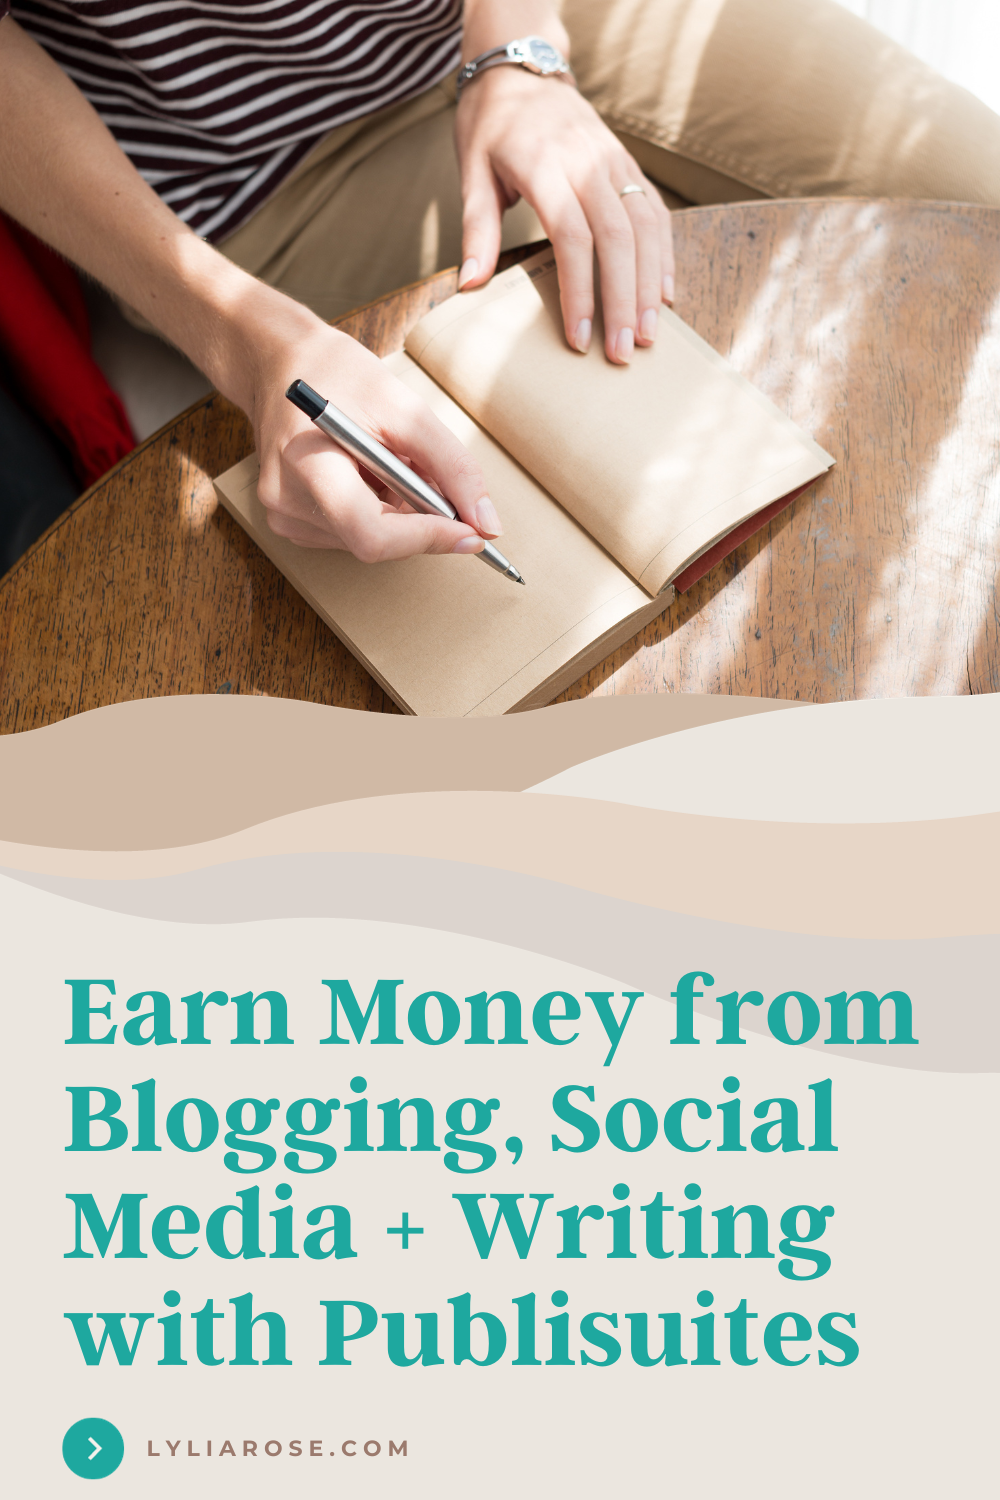 Earn Money from Blogging, Social Media + Writing with Publisuites